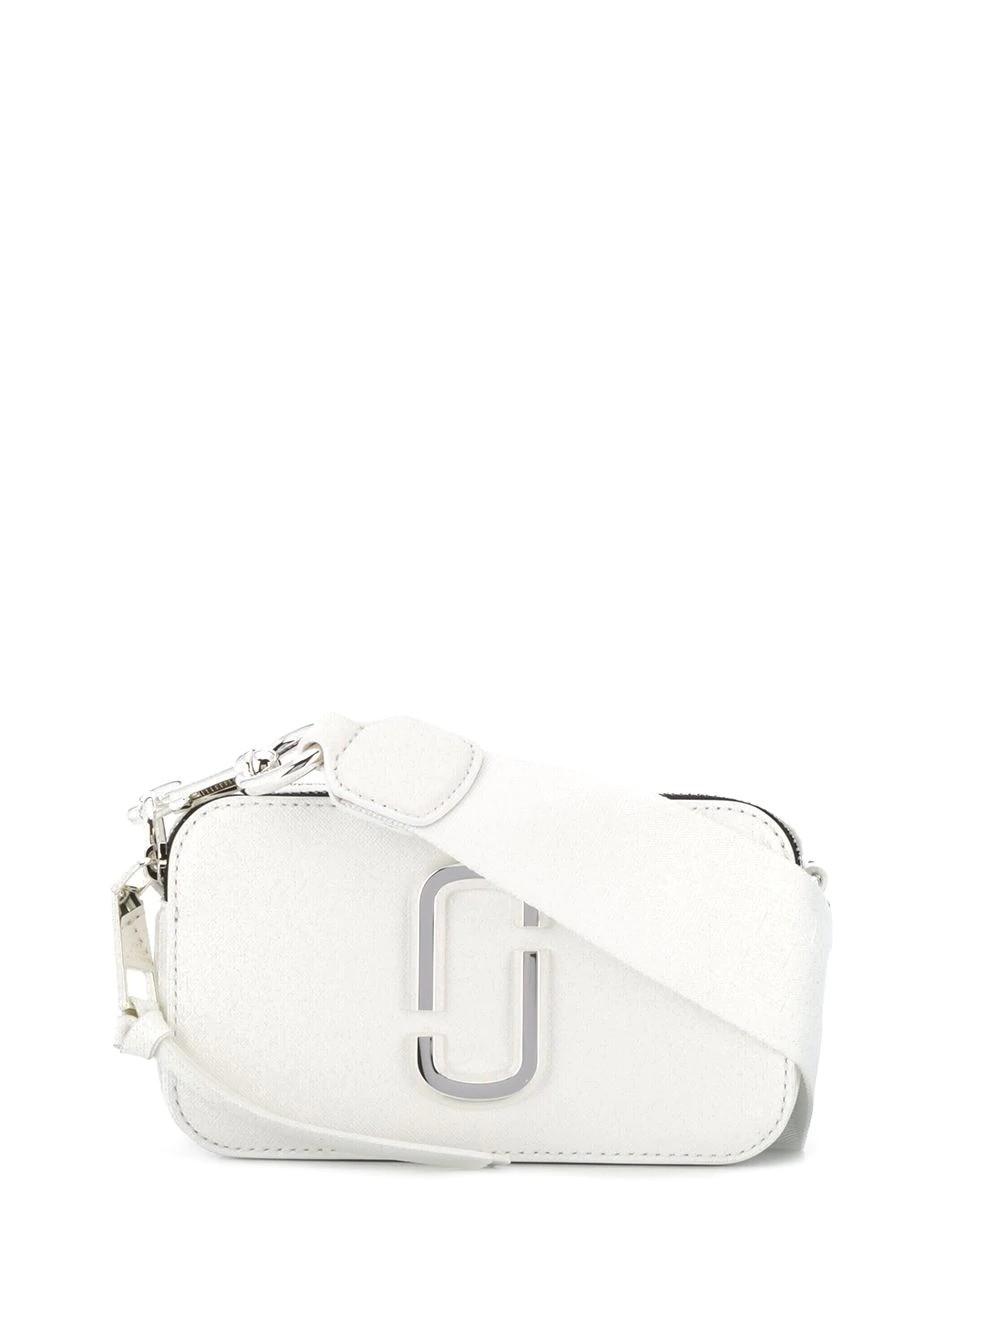 Marc Jacobs Leather Snapshot Dtm Cross Body Bag in White (Pink) | Lyst